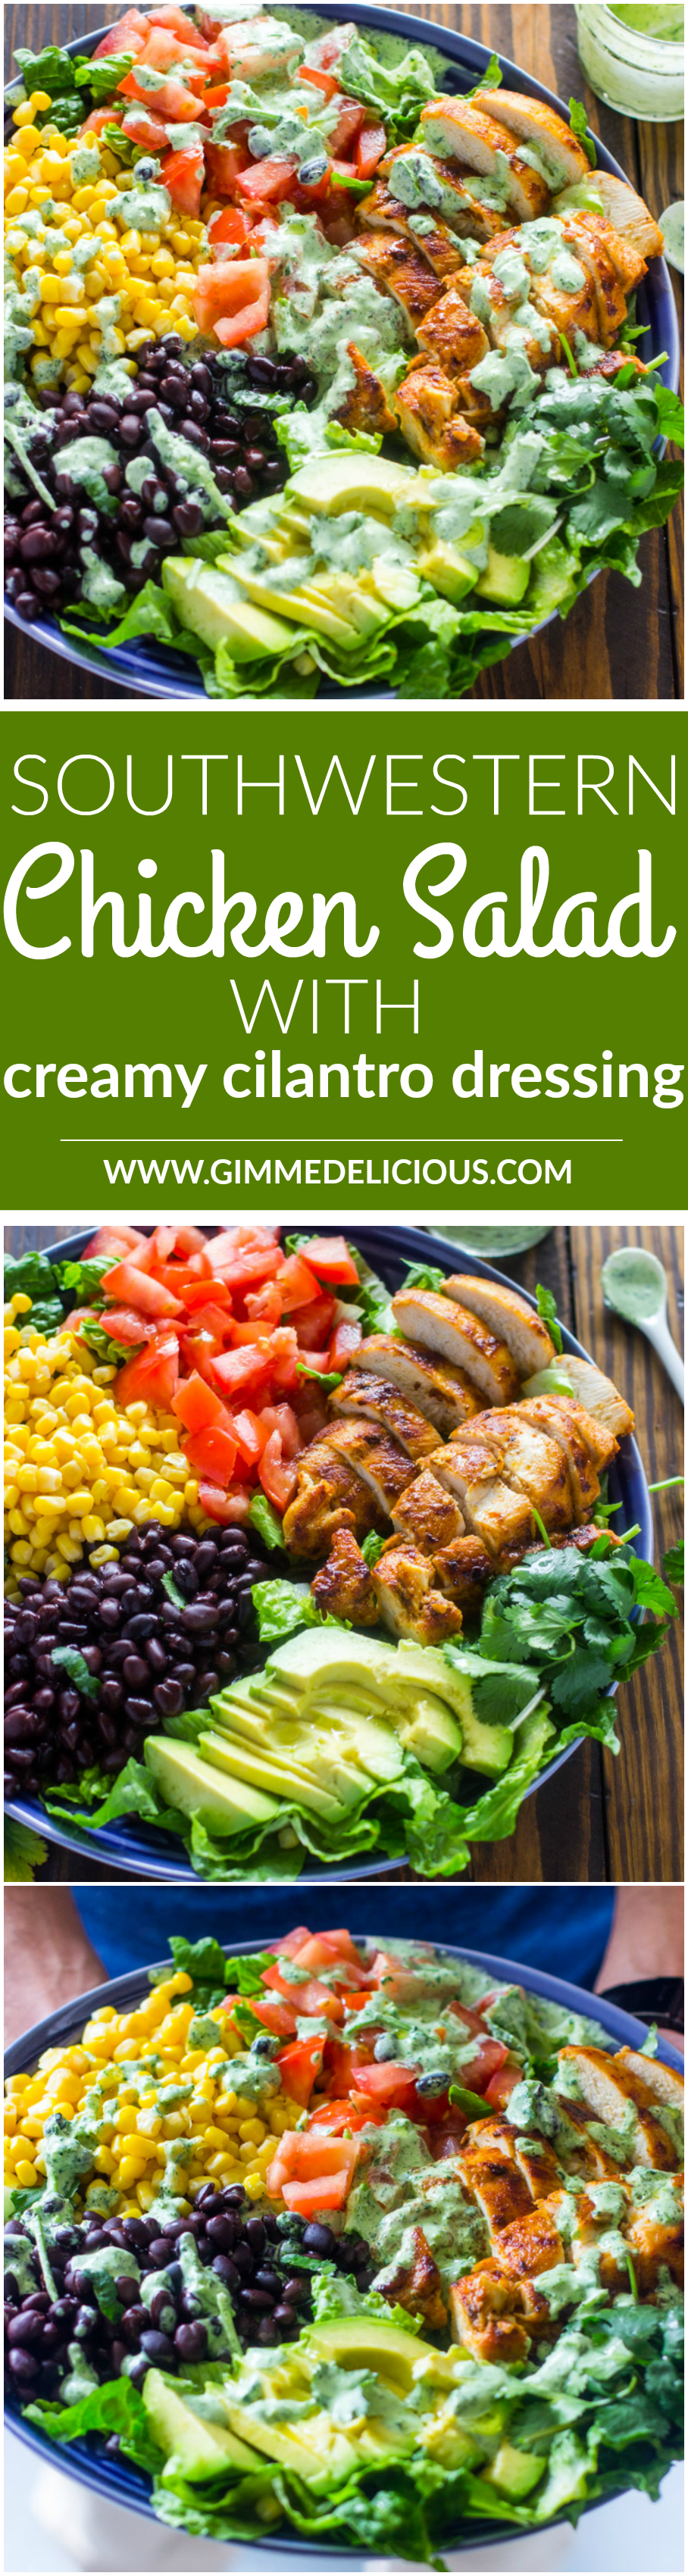 Southwestern chicken salad with creamy cilantro dressing is 1000x more delicious, fresher, and healthier than any restaurant salad at a fraction of the price.